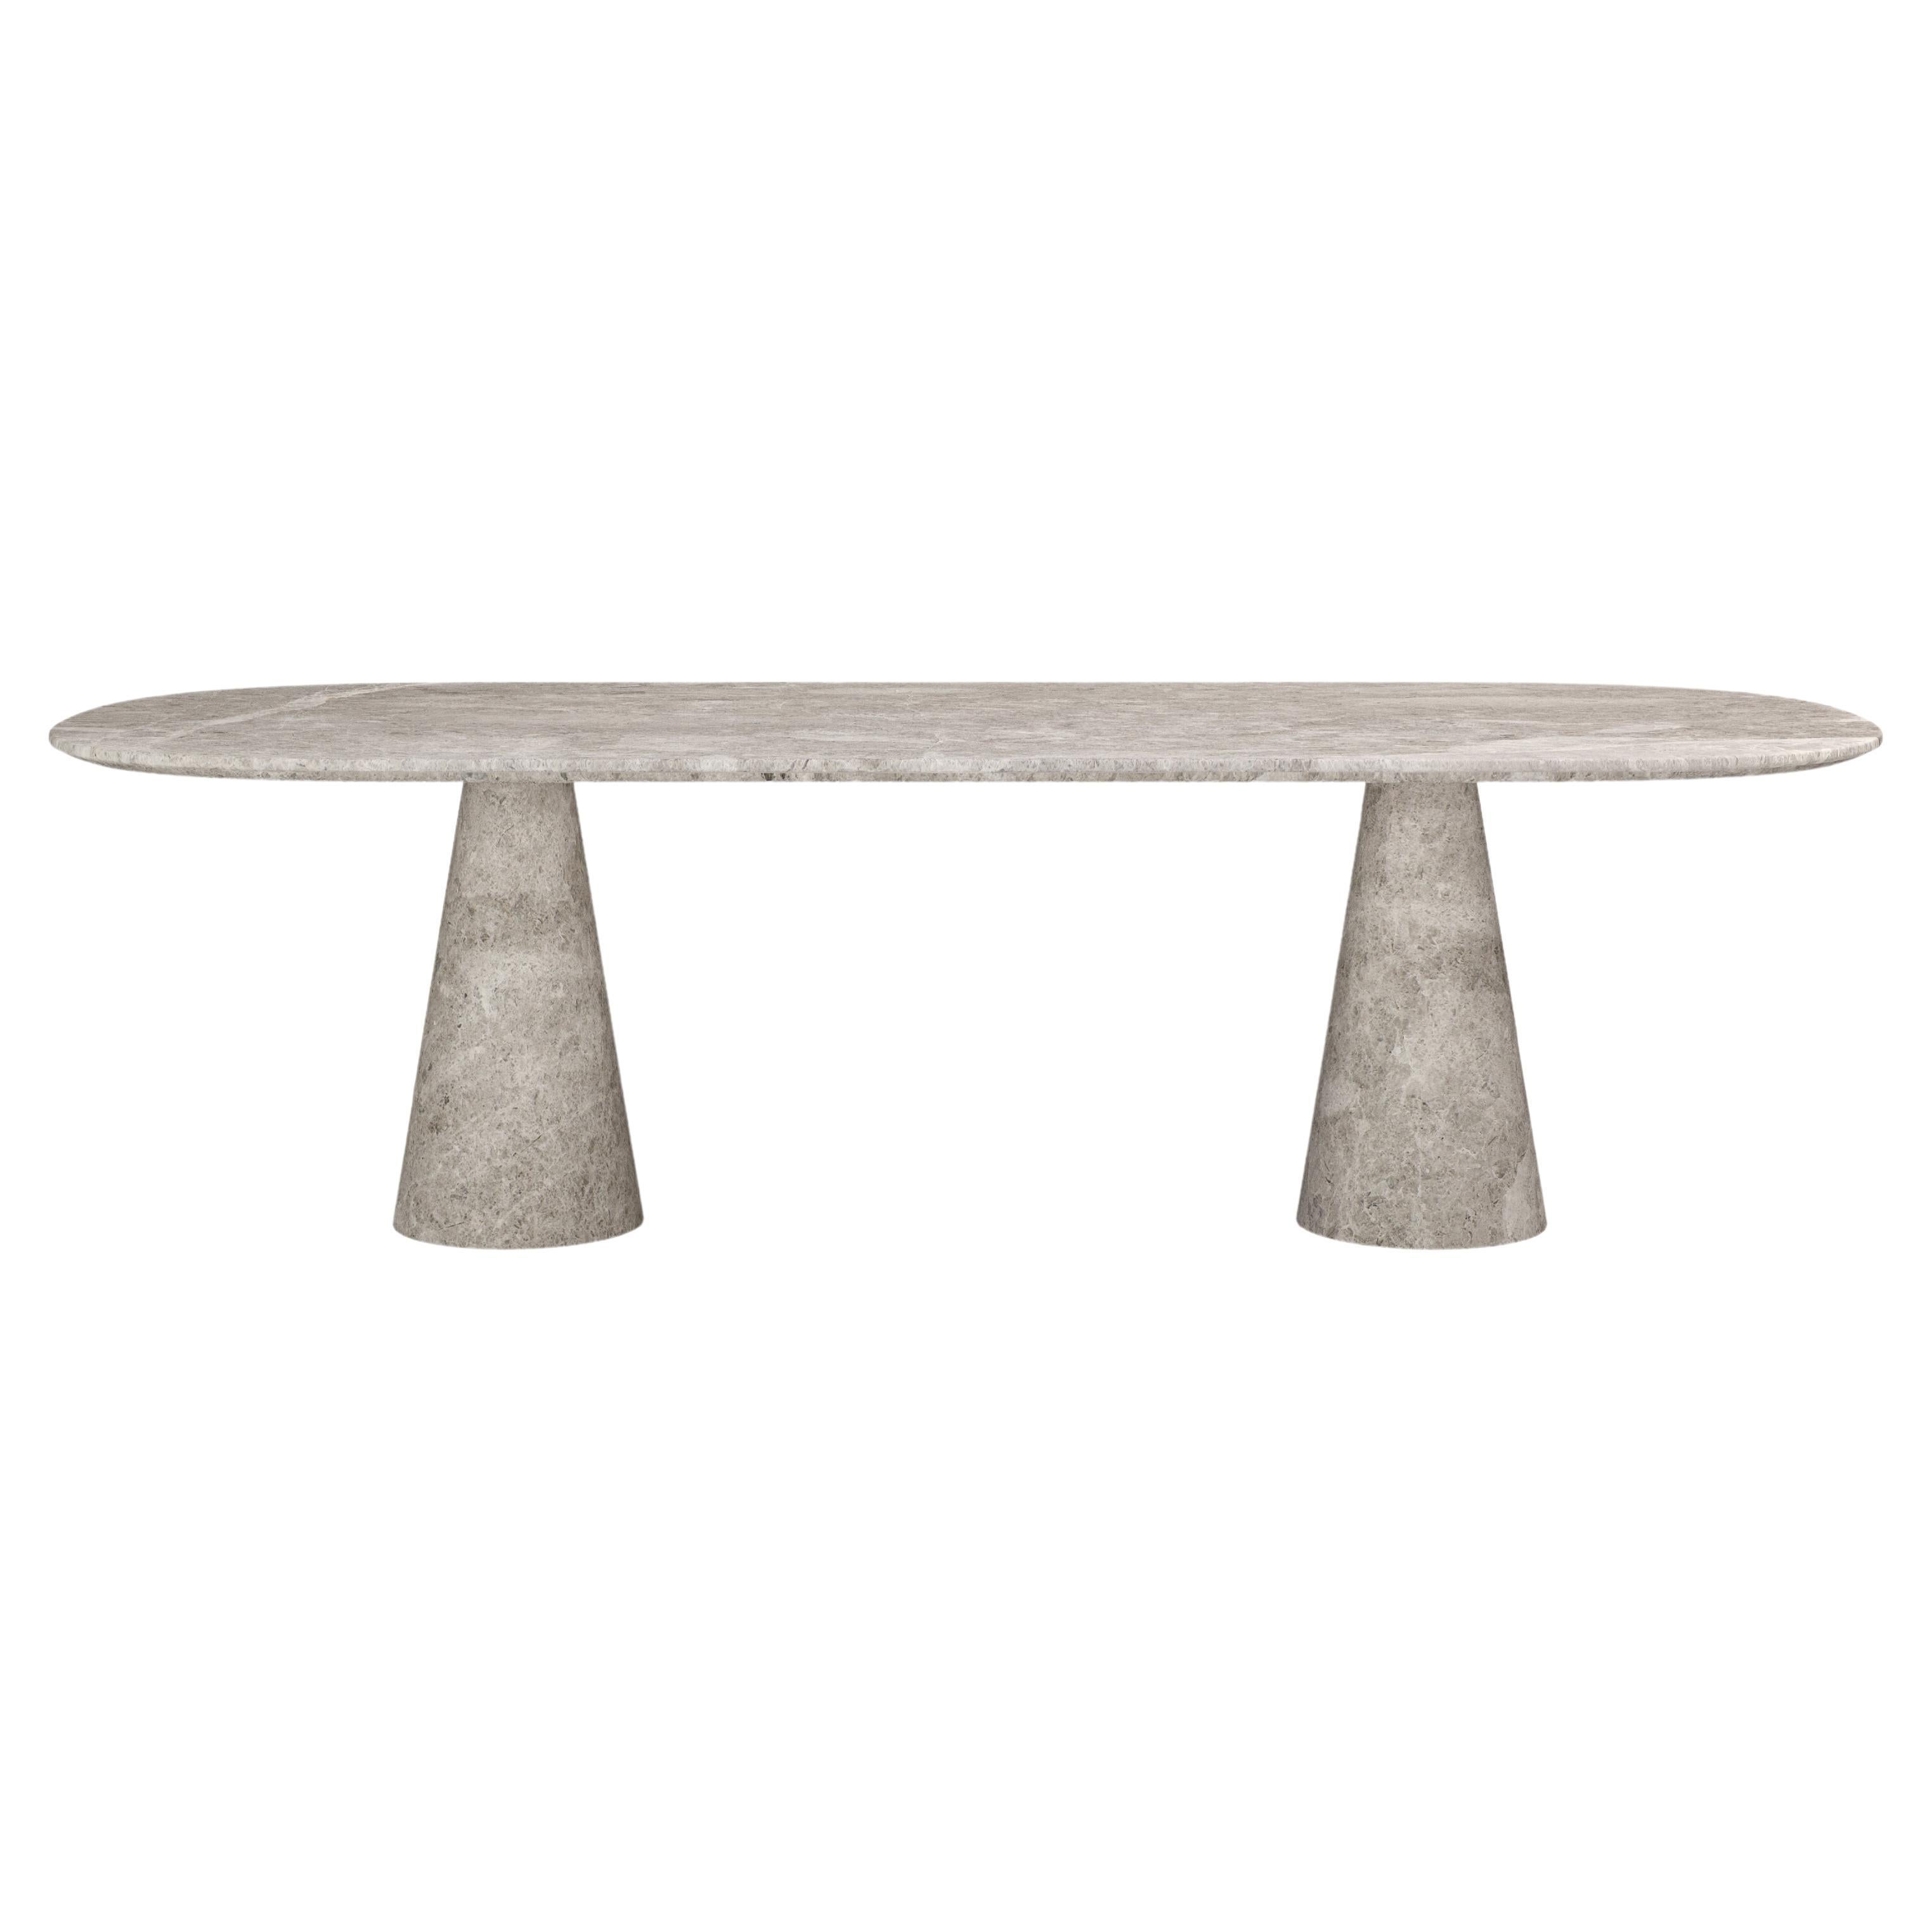 FORM(LA) Cono Oval Dining Table 118”L x 48”W x 30”H Tundra Gray Marble For Sale